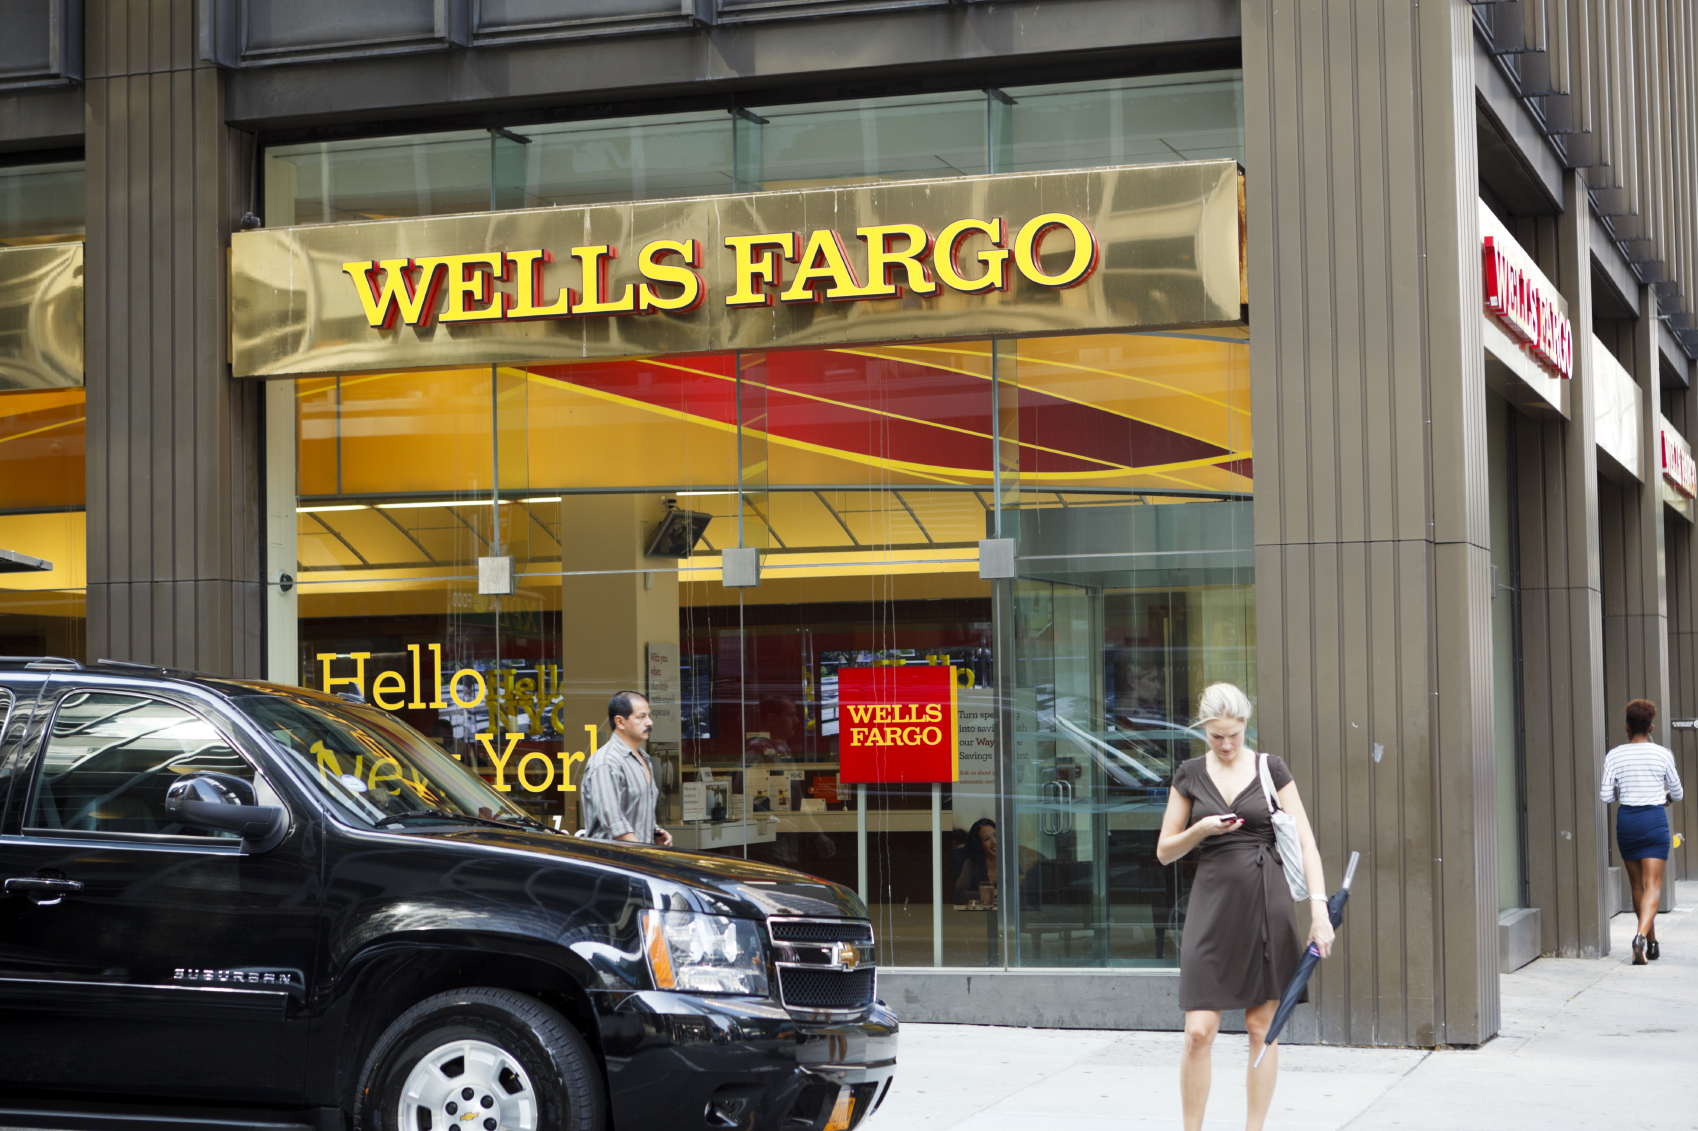 New York, New York, USA - August 18, 2011: A Wells Fargo Bank branch on 3rd avenue in Manhattan. A woman can be seen checking her phone as well as two other pedestrians. [url=/my_lightbox_contents.php?lightboxID=3623142]Click here for more[/url] New York images and video.